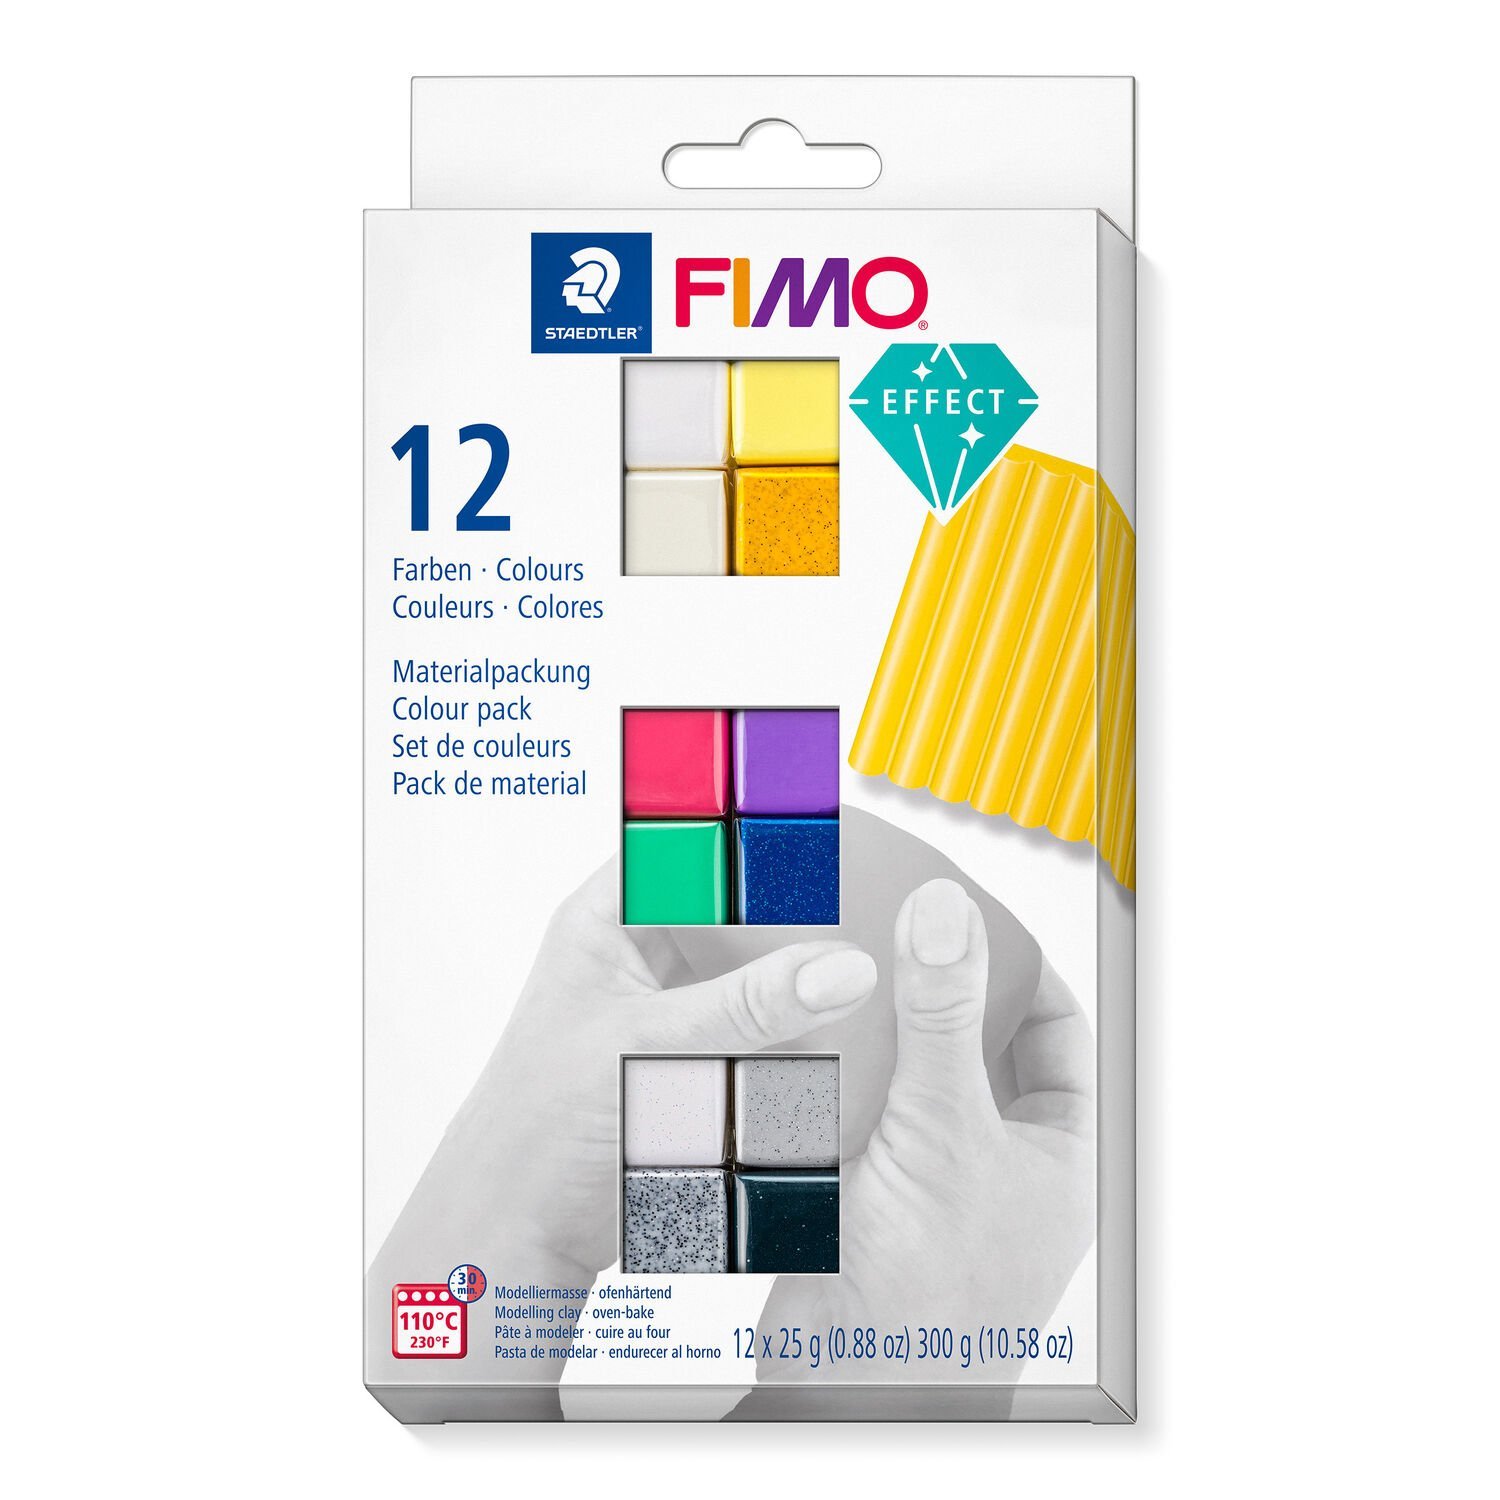 FIMO® Colour pack 8013 C - Oven-bake modelling clay